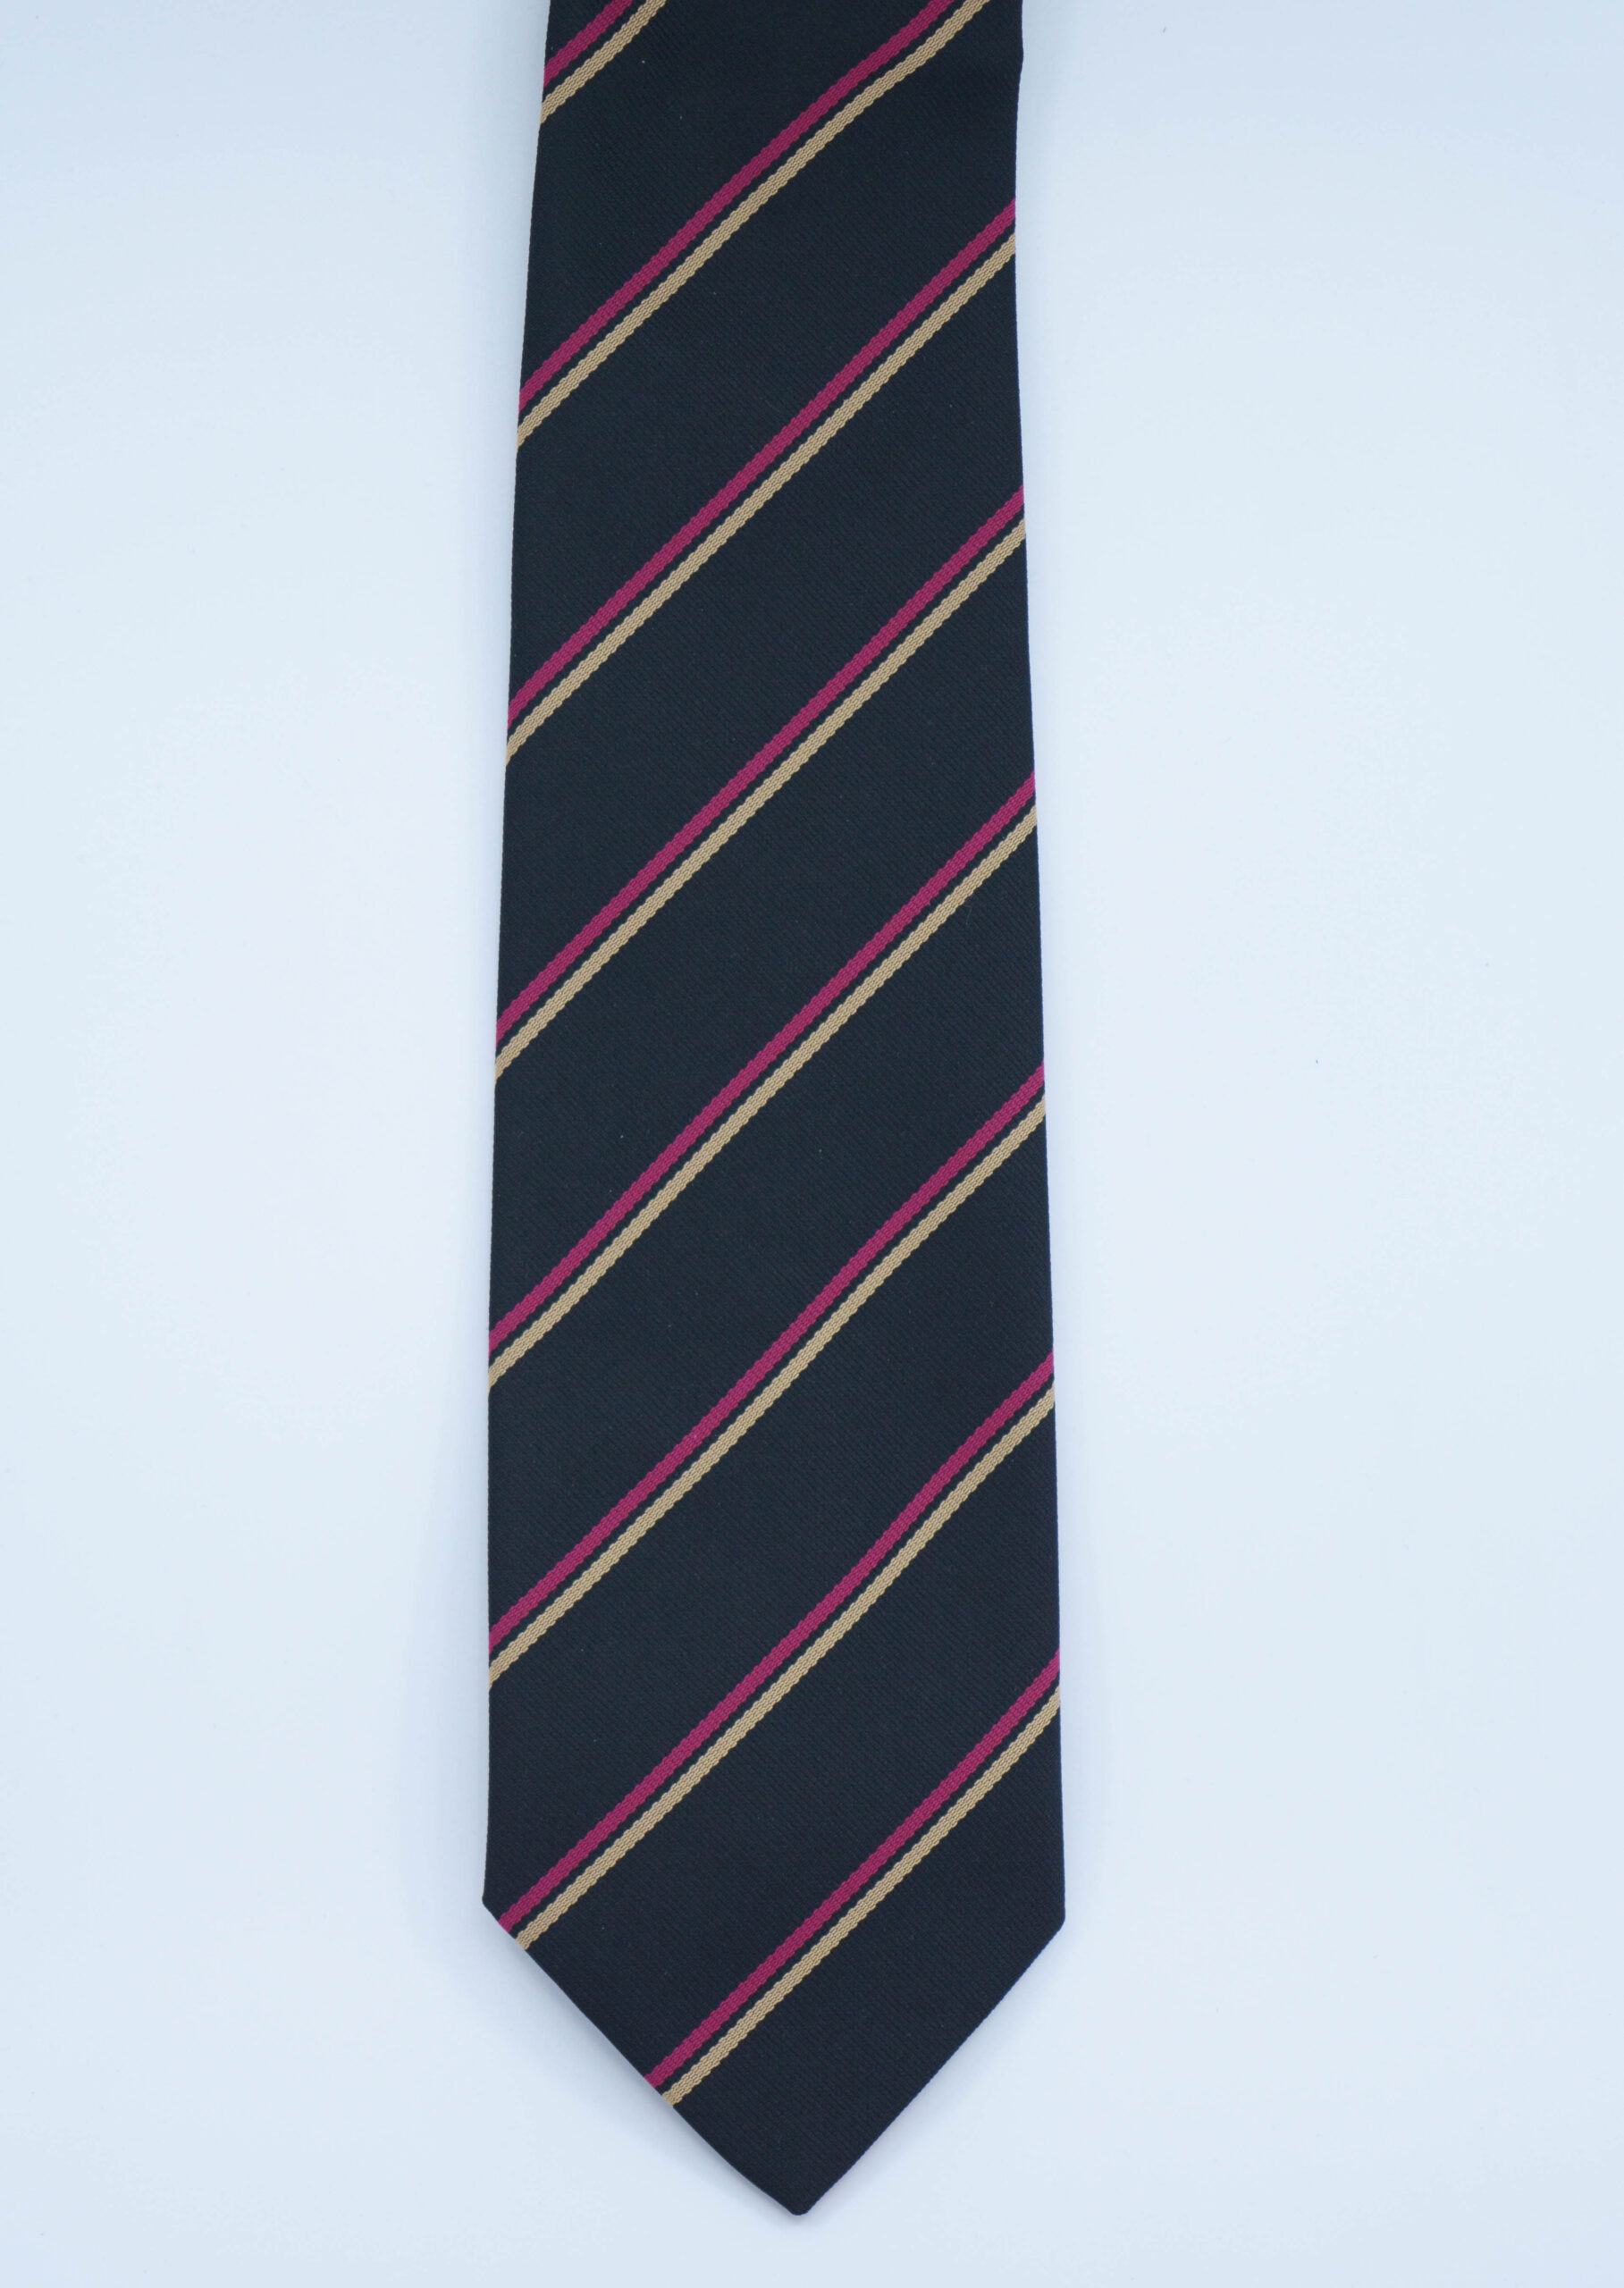 CHESHIRE REGIMENT TIE - Cain of Heswall